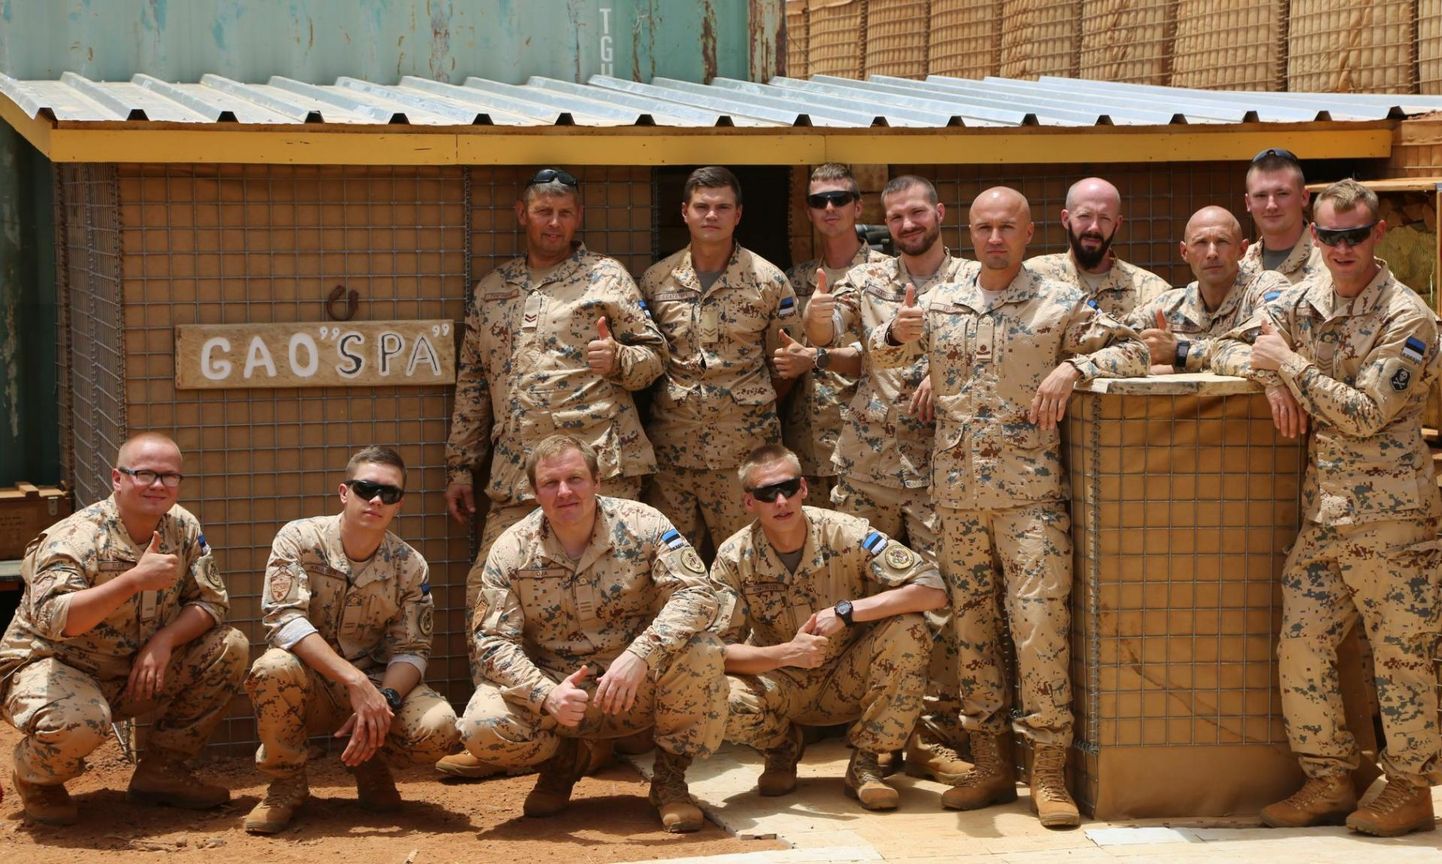 Estonian servicemen who served in Mali at the Gao base.